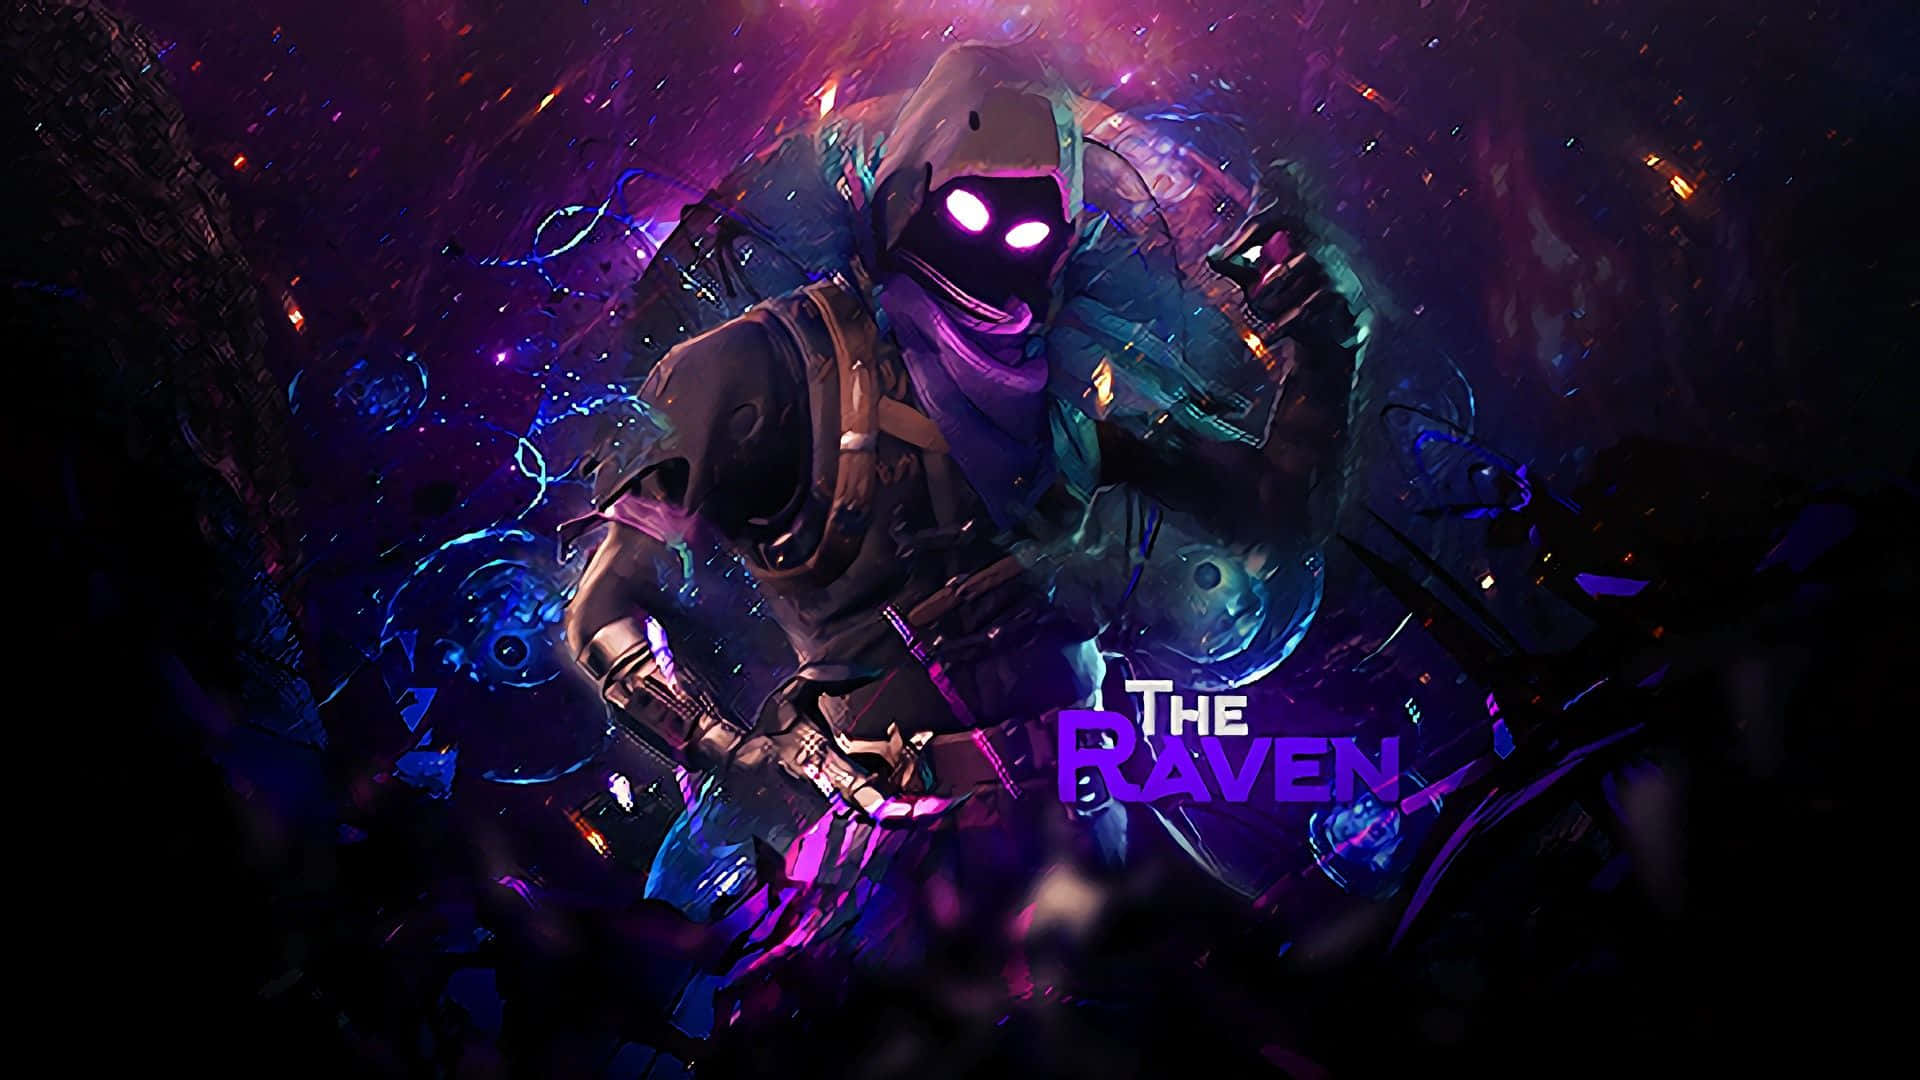 Unlock your inner power with the Raven Outfit, now available in Fortnite! Wallpaper